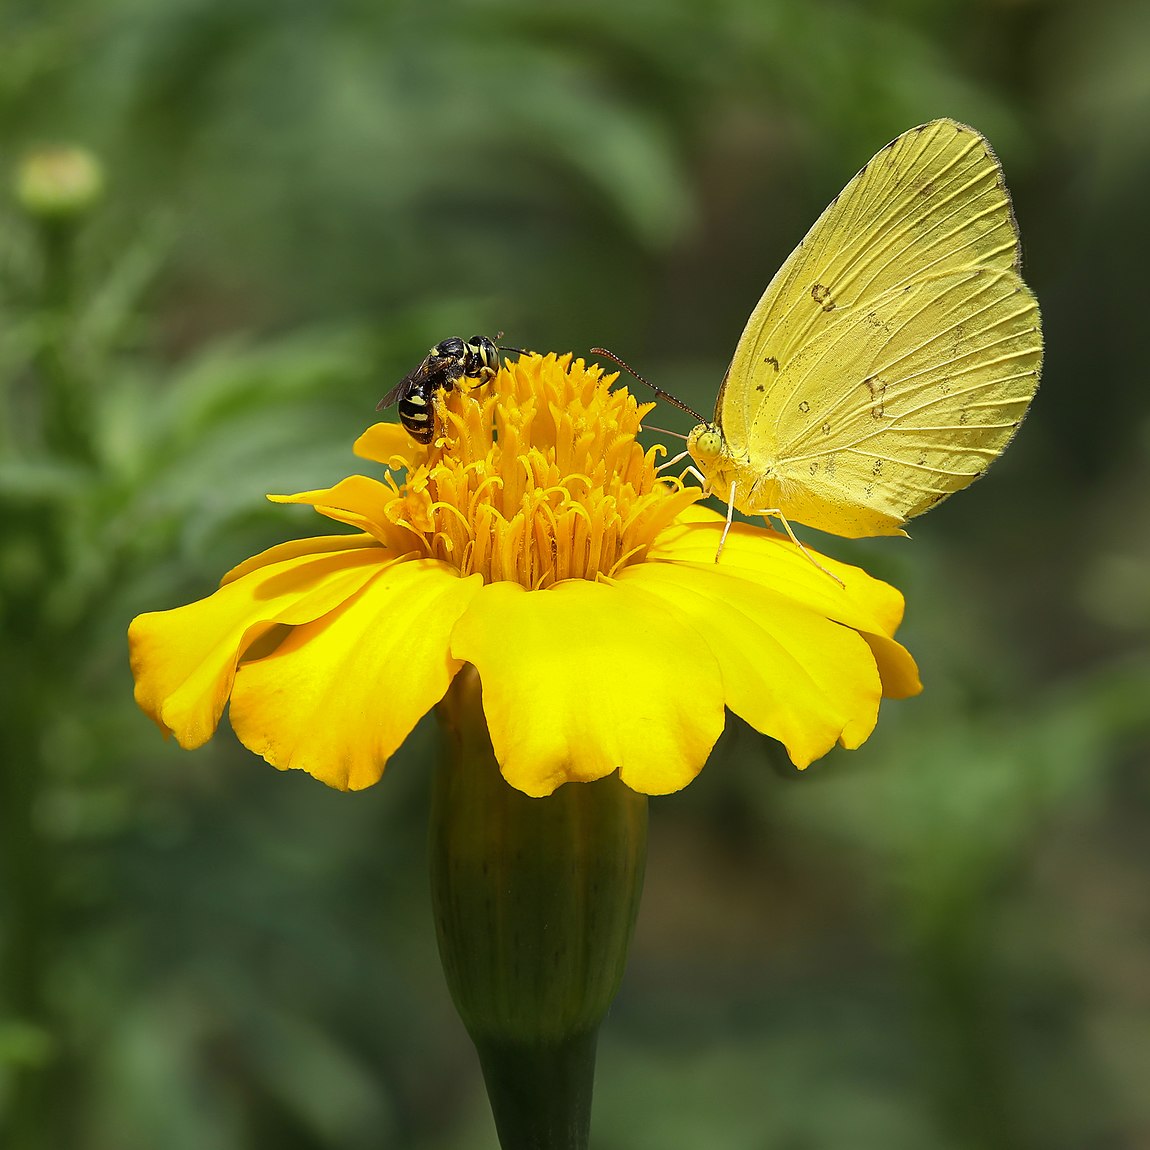 Vespidae (wasp) and Eurema blanda (three-spot grass yellow) butterfly on a tagetes lucida